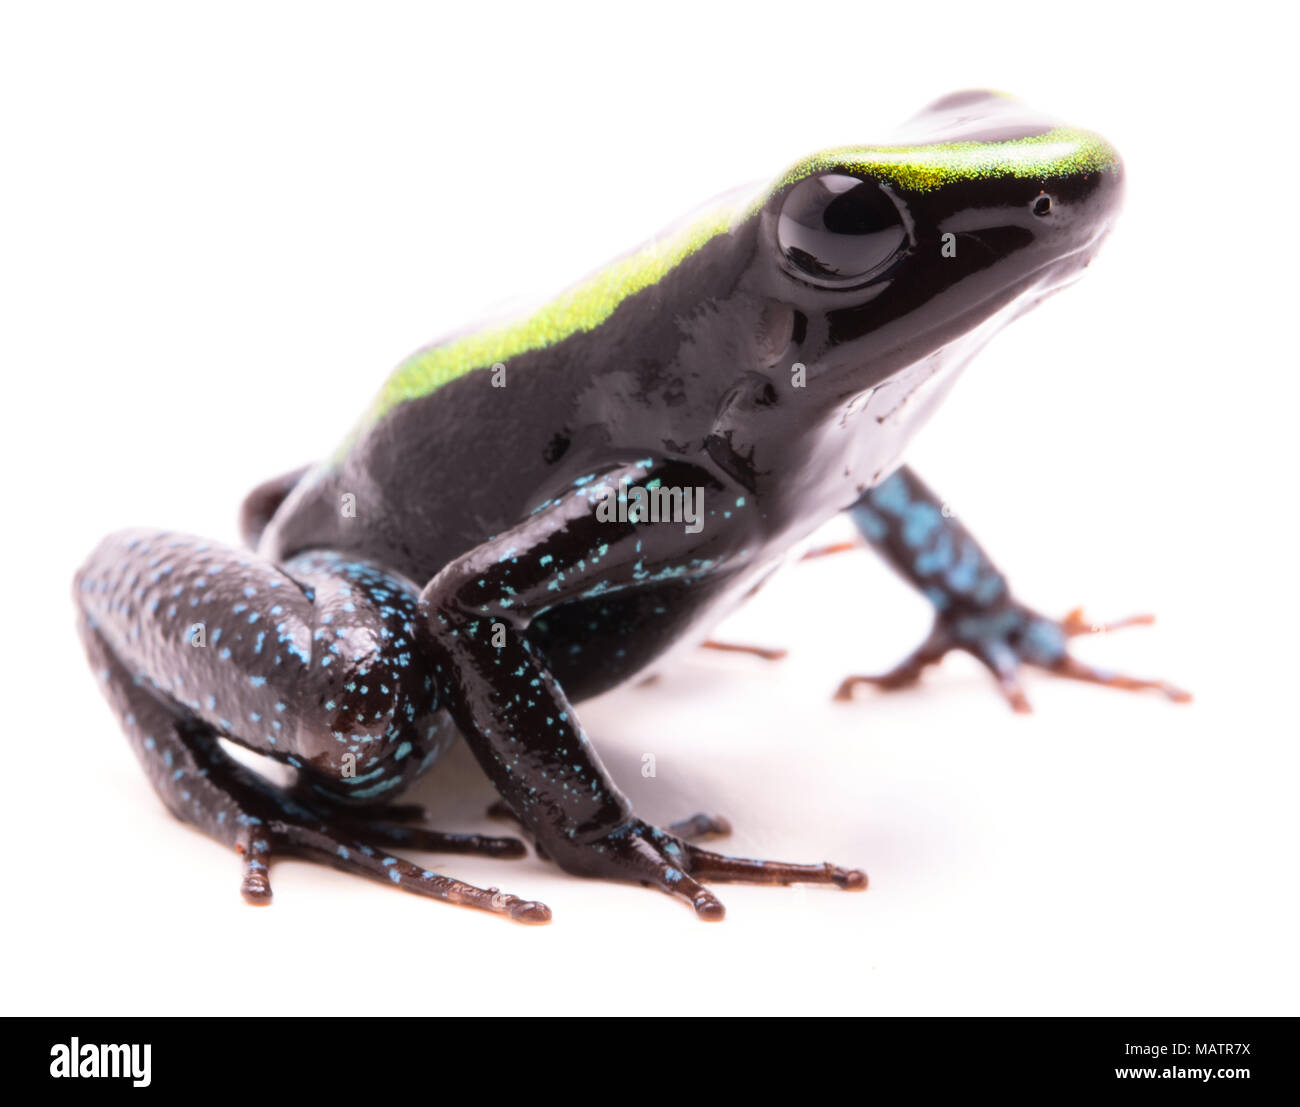 Kokoe poison dart frog, Phyllobates aurotaenia. A very poisonous and dangerous animal from the tropical Amazon rain forest in Colombia. Isolated on wh Stock Photo